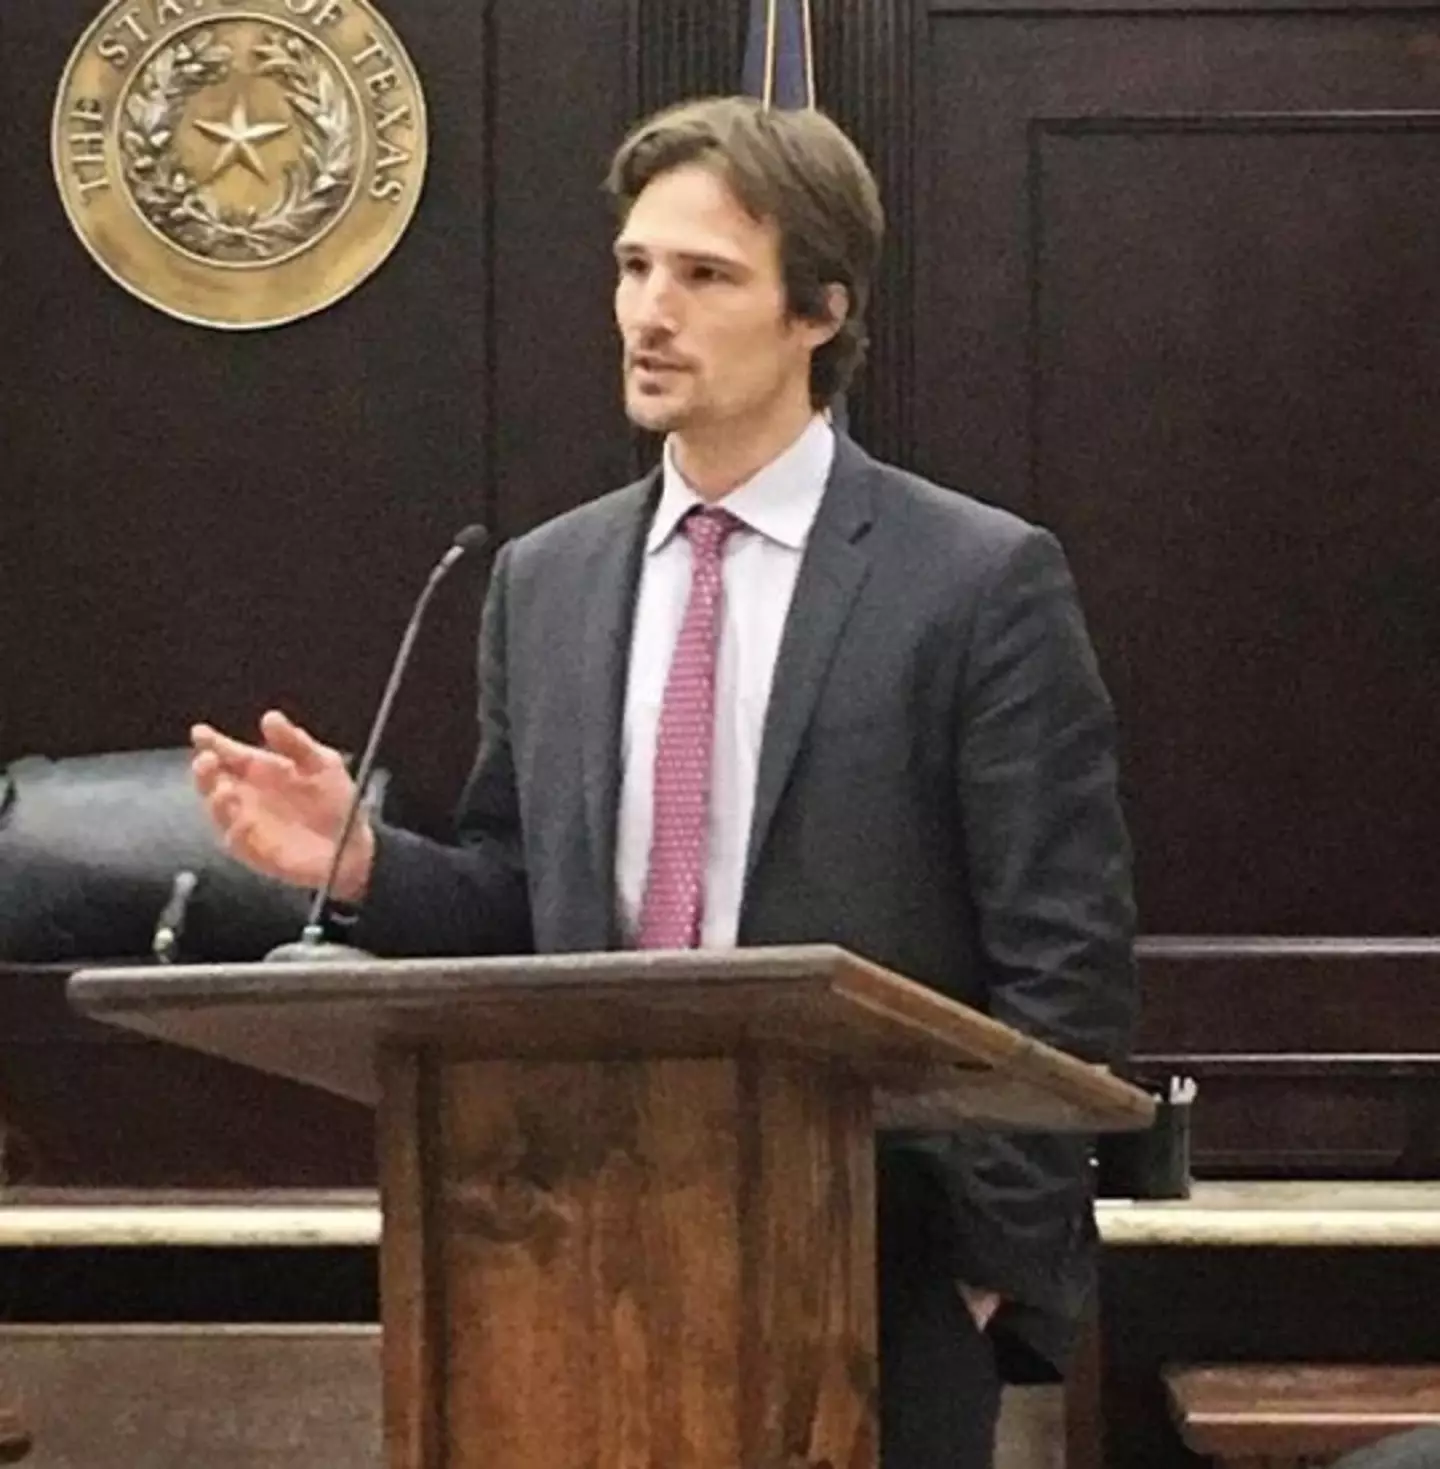 Lucas Babin is now a district attorney in Texas.